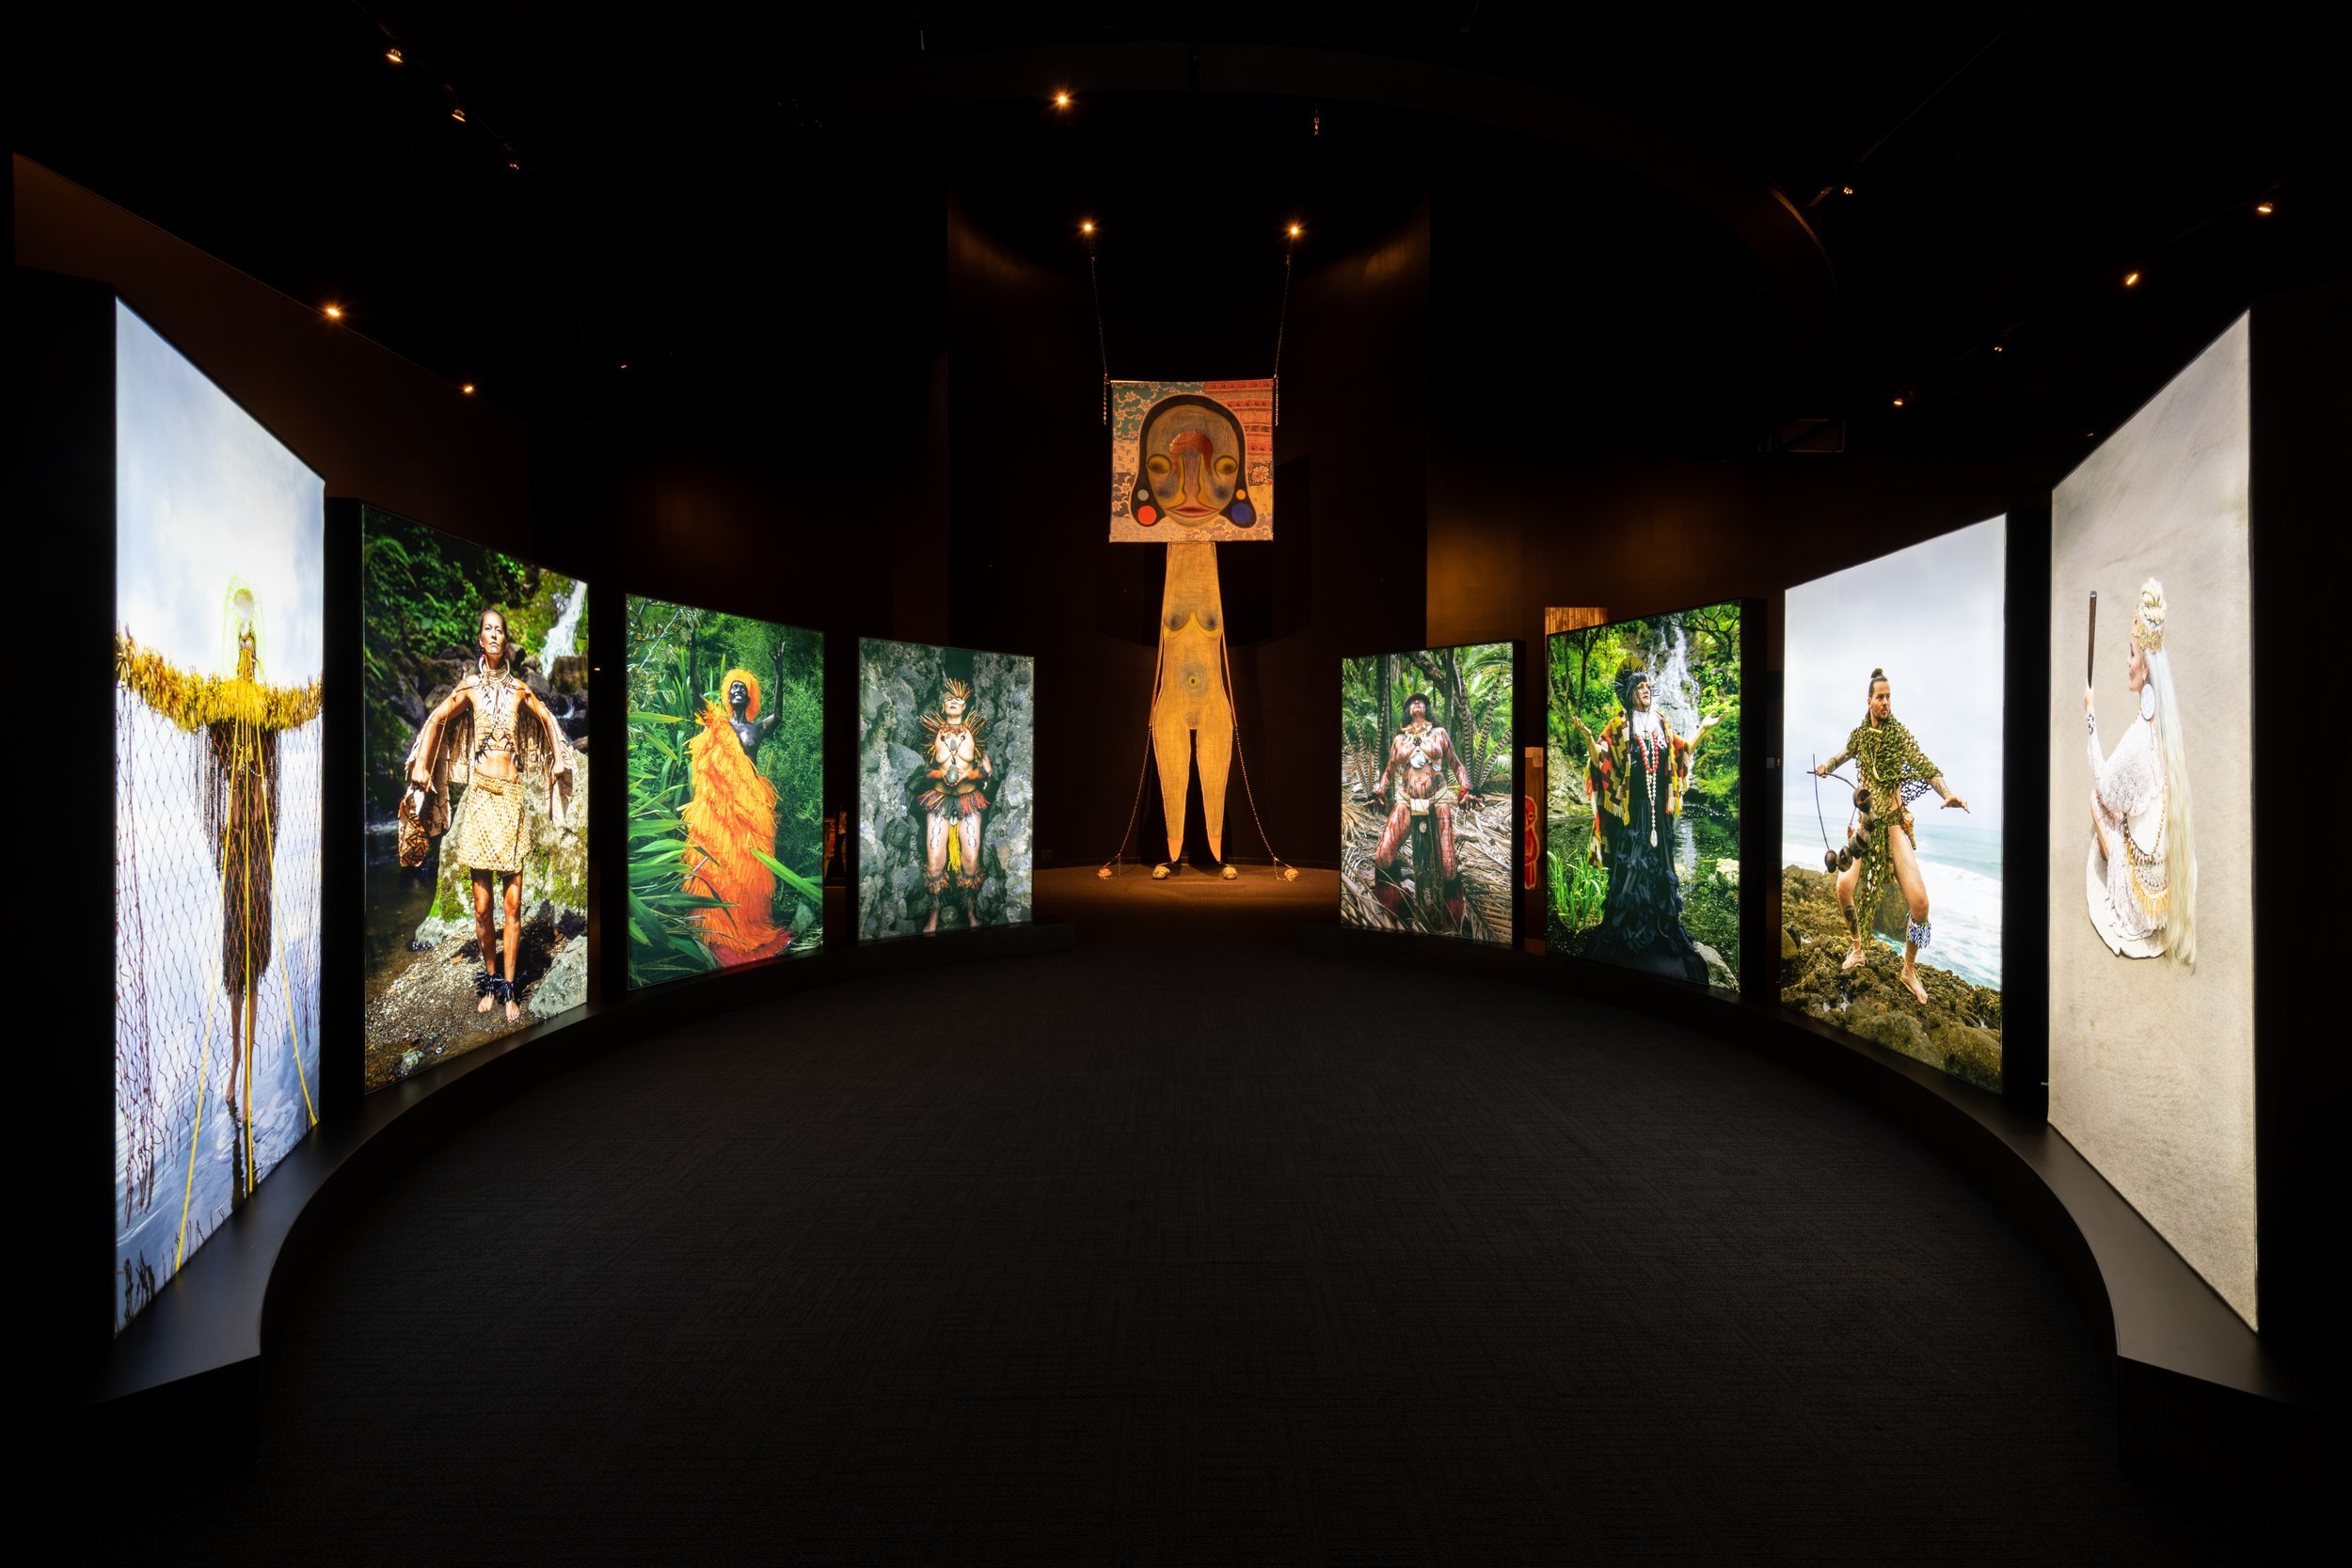  Installation views: Pacific Sisters, Te Pu o Te Wheke, 2021, photographic image on fabric, aluminum, wood, lightbox, Augmented Reality: iSPARX, Bishop Museum, HT22, Honolulu. Courtesy of the artists and Hawai‘i Contemporary. Photos: Christopher Rohr